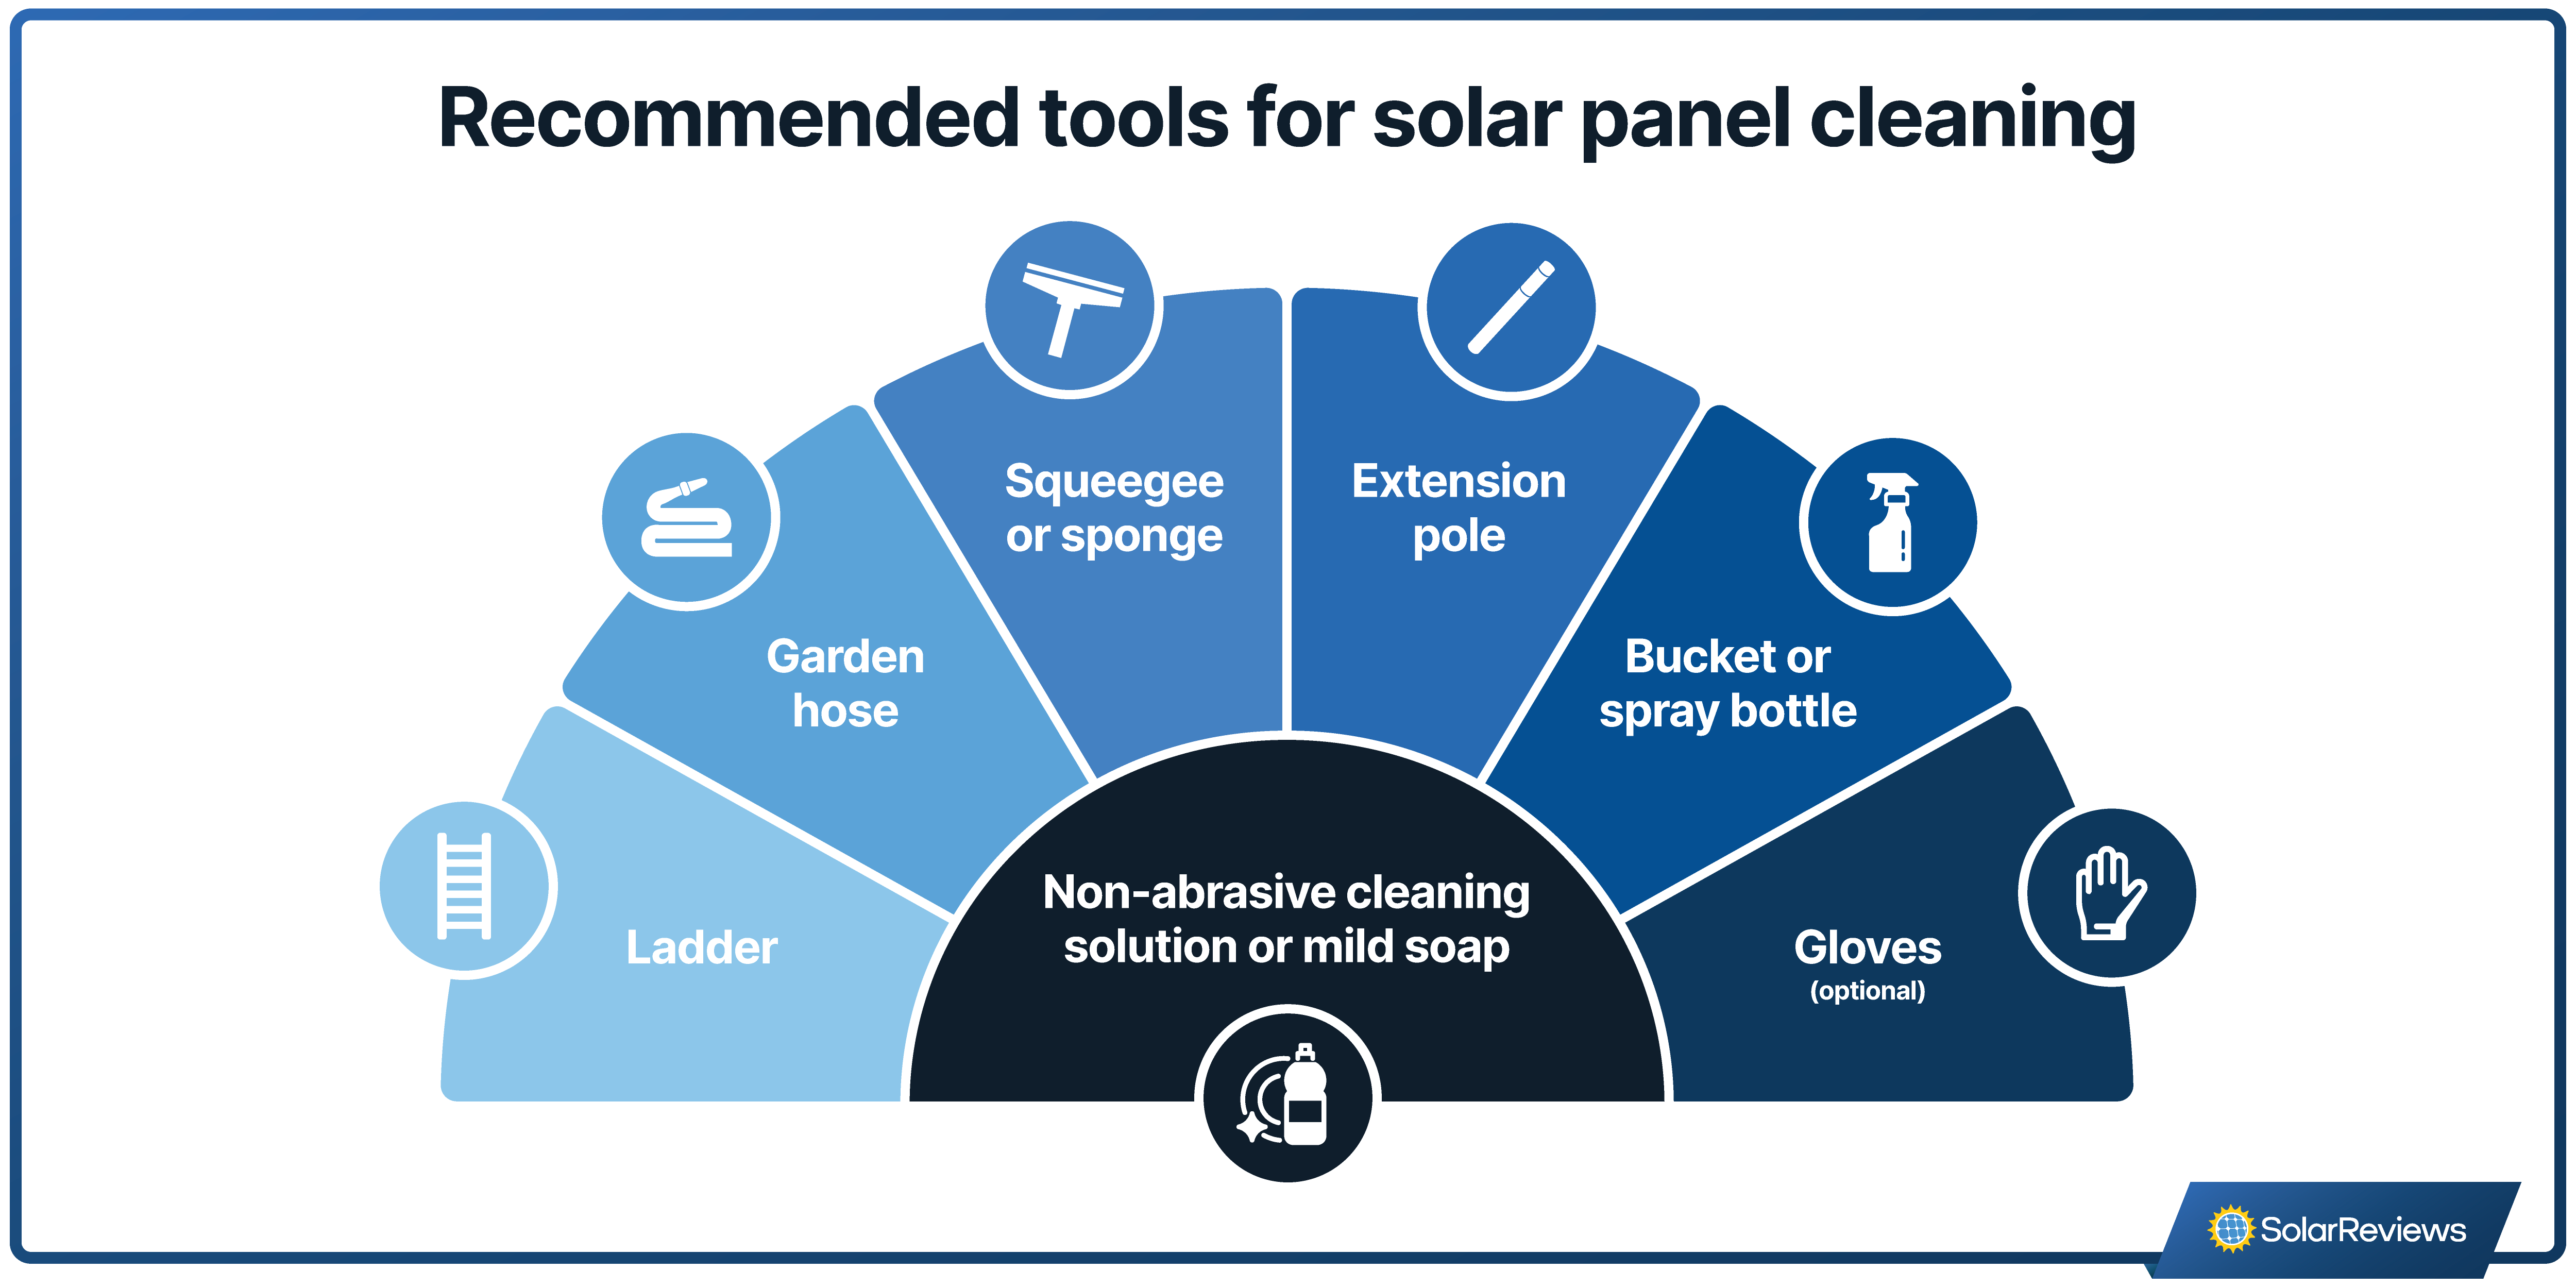 Graphic showing the reccomended tools for solar panel cleaning: non-abrasive cleaning solution or mild soap, gloves, bucket or spray bottle, an extension pole, squeegeee or sponge, a garden hose, and a ladder